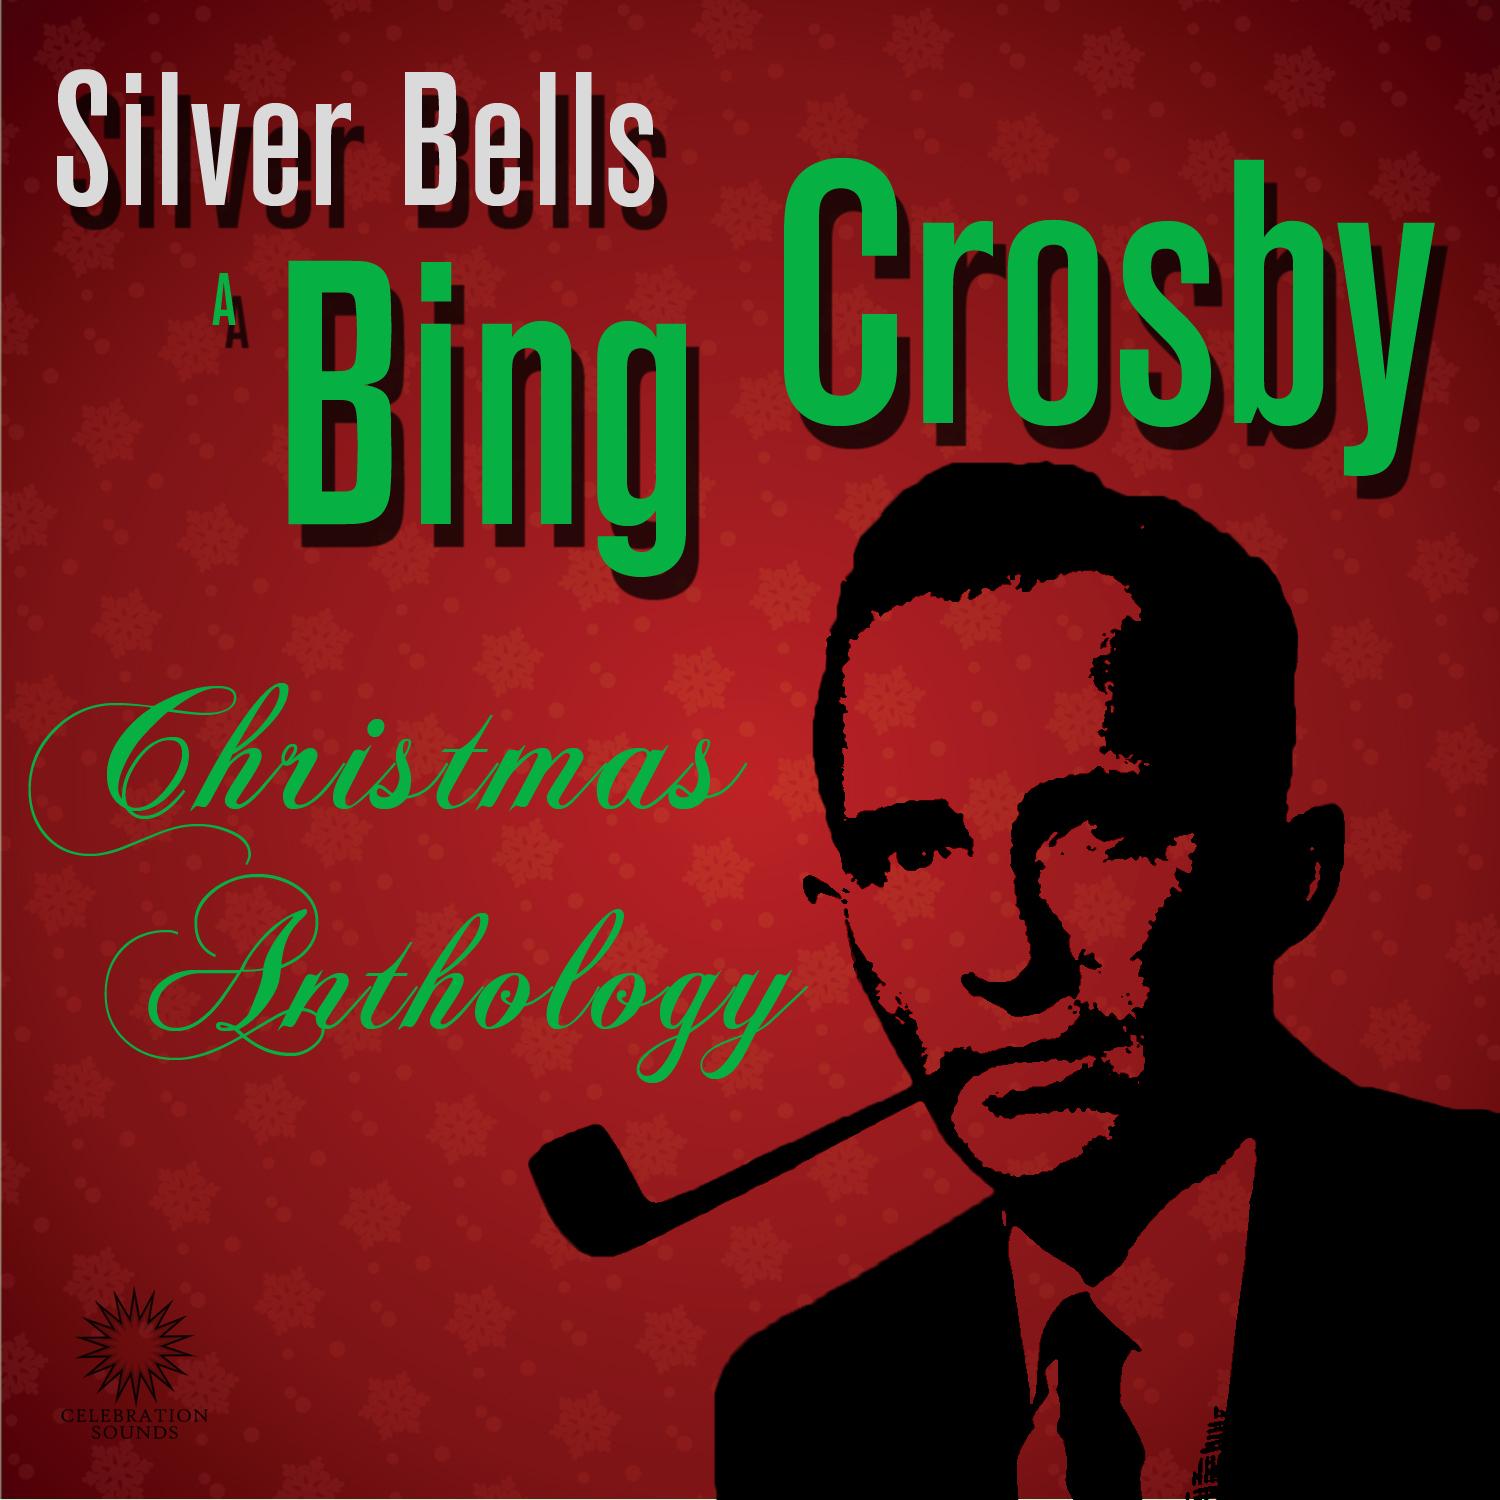 Silver Bells: A Bing Crosby Christmas Anthology Including White Christmas, Chestnuts Roasting on an Open Fire, Let It Snow & More